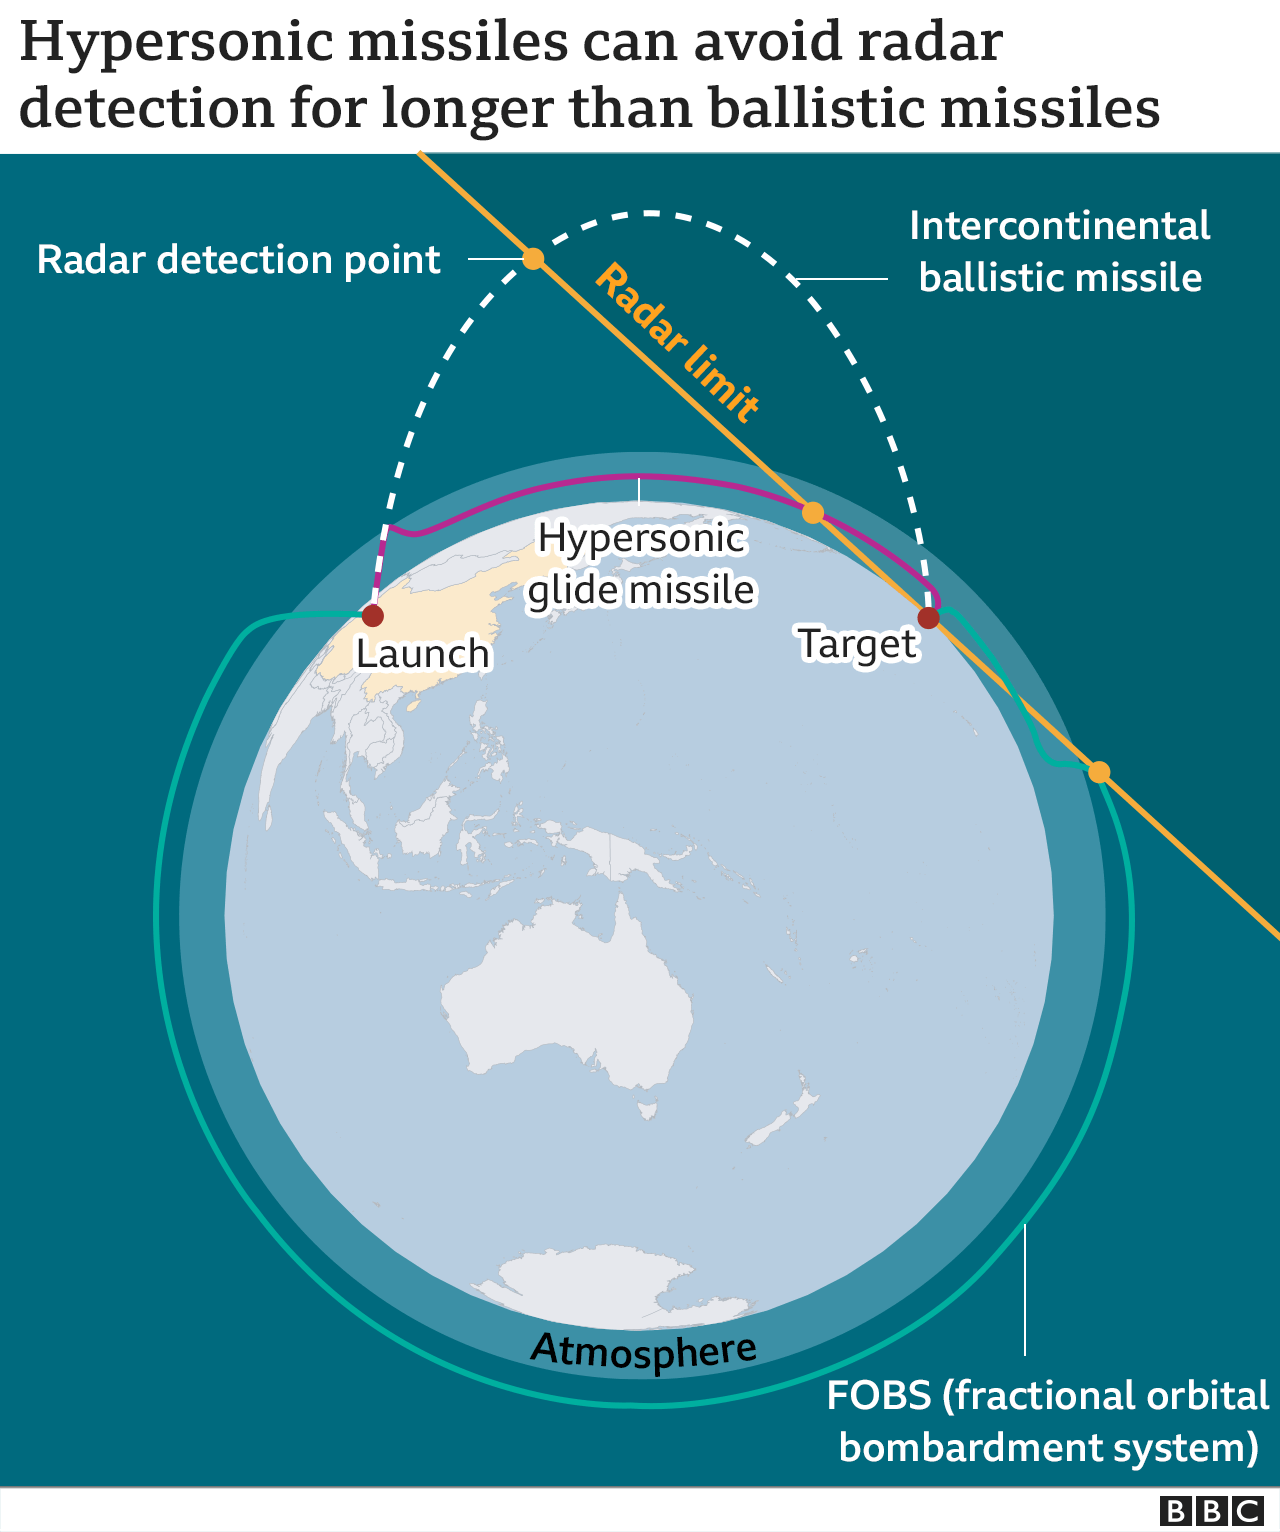 Diagram showing the arc of ICBMs versus hypersonic